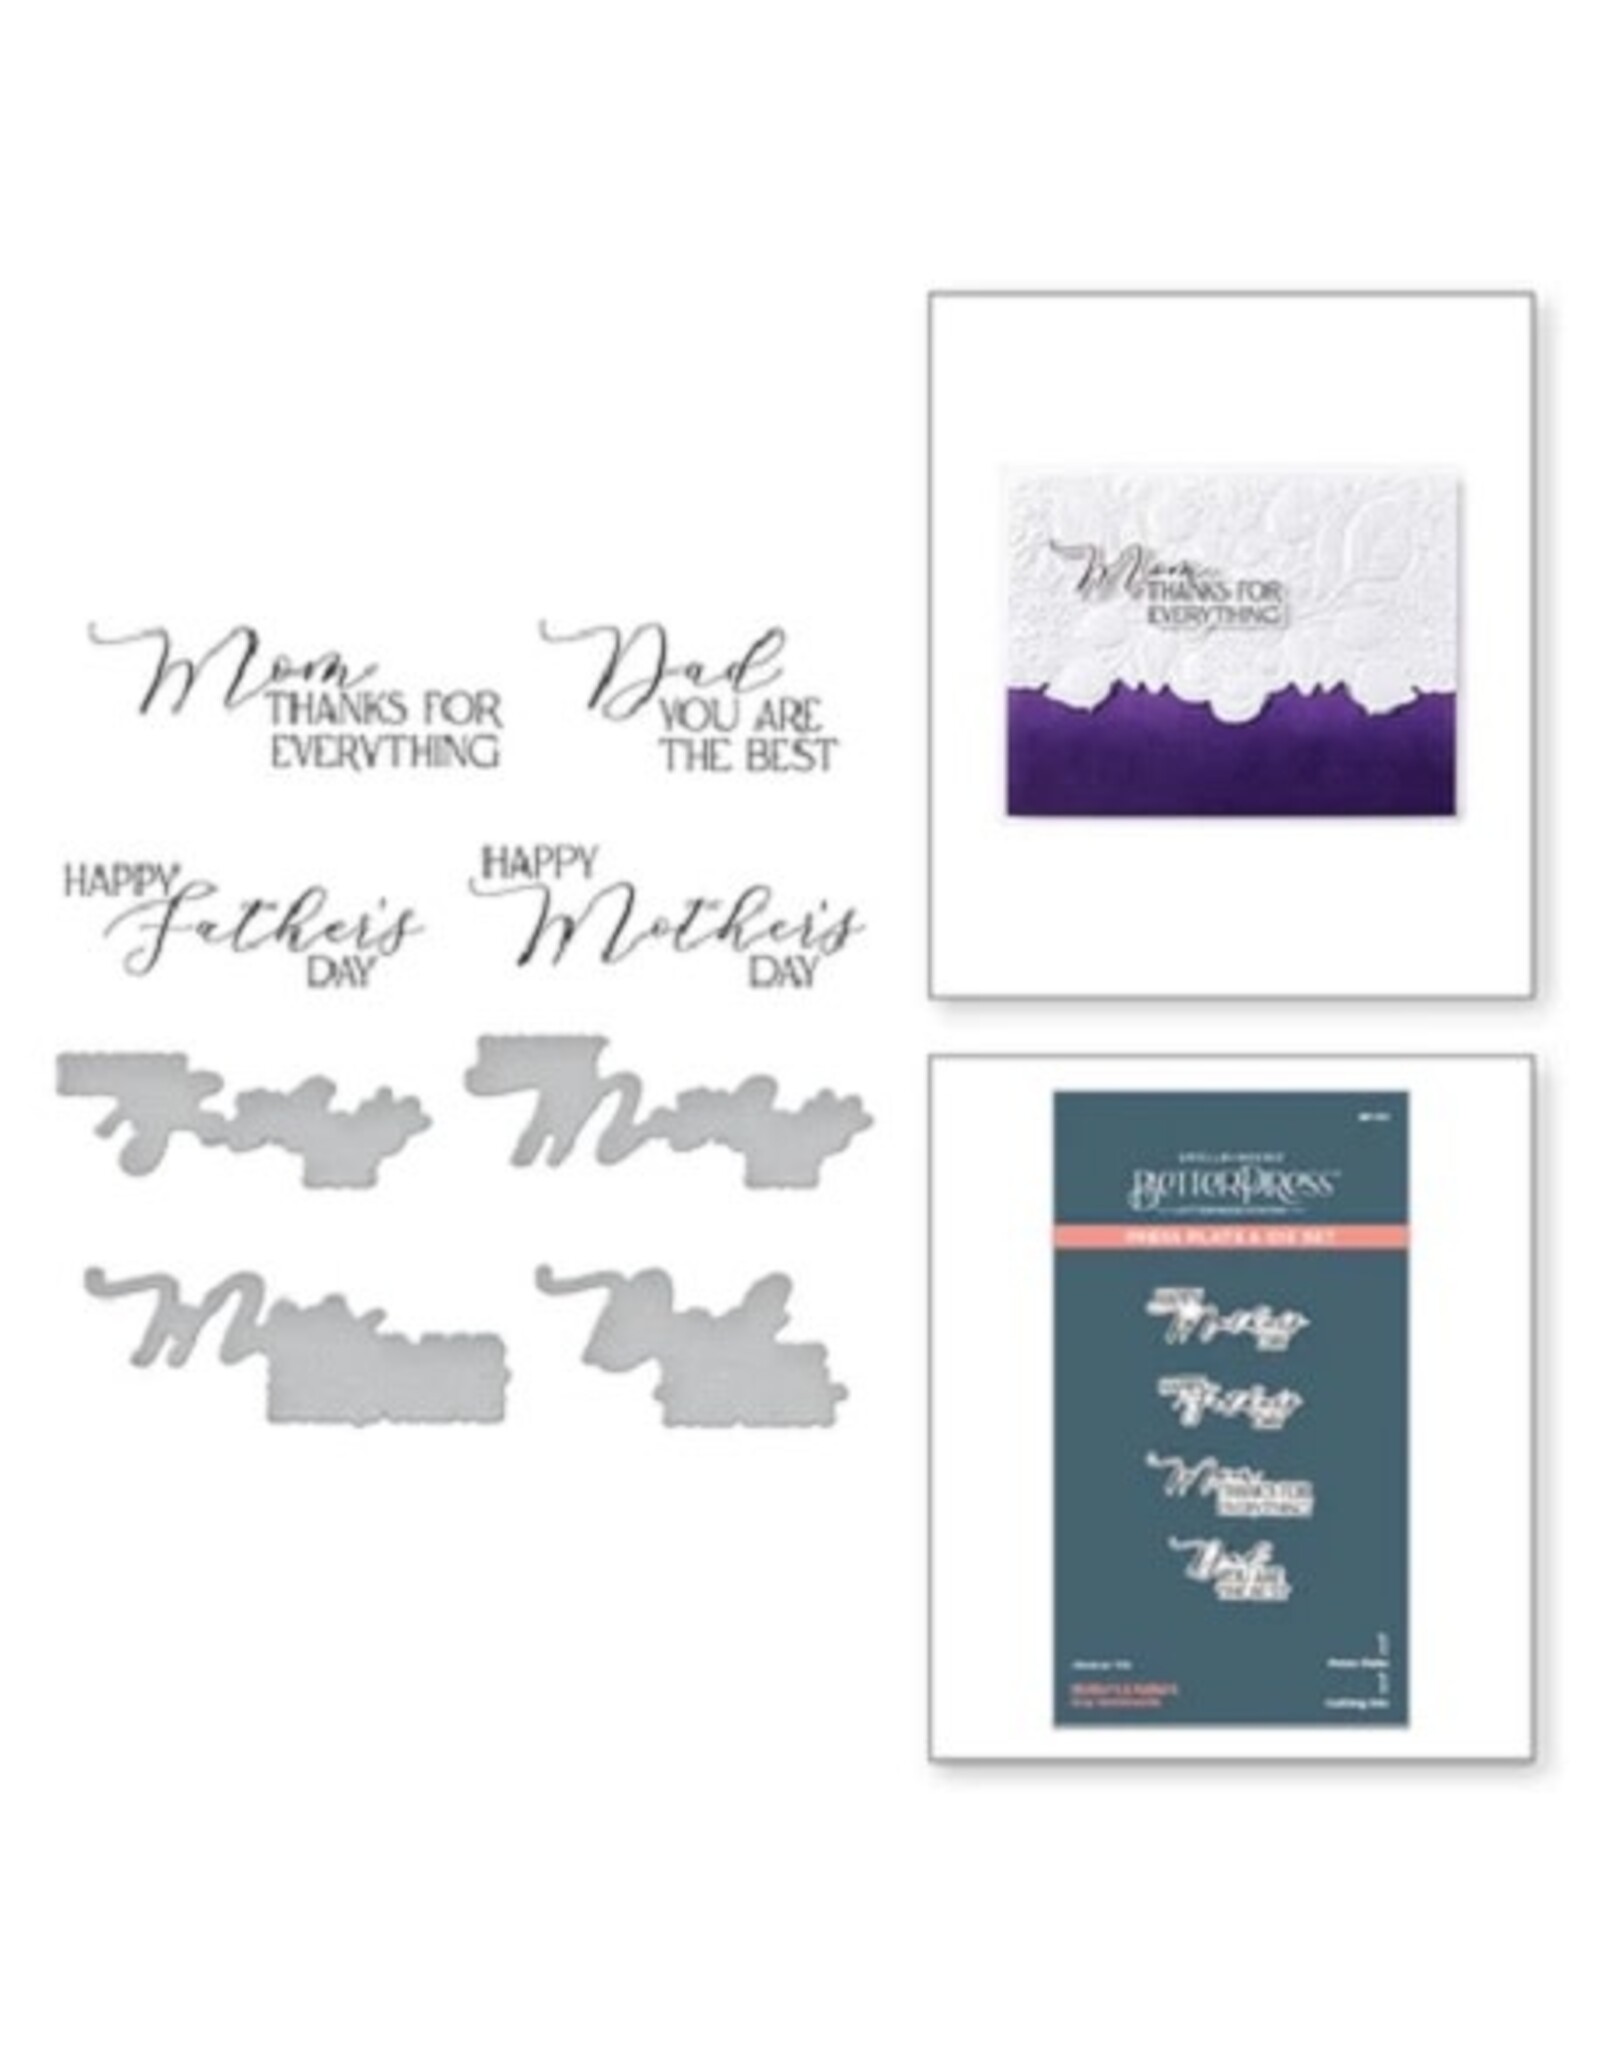 Spellbinders Mirrored Arch Collection - Mother's & Father's Day Sentiments Press Plate